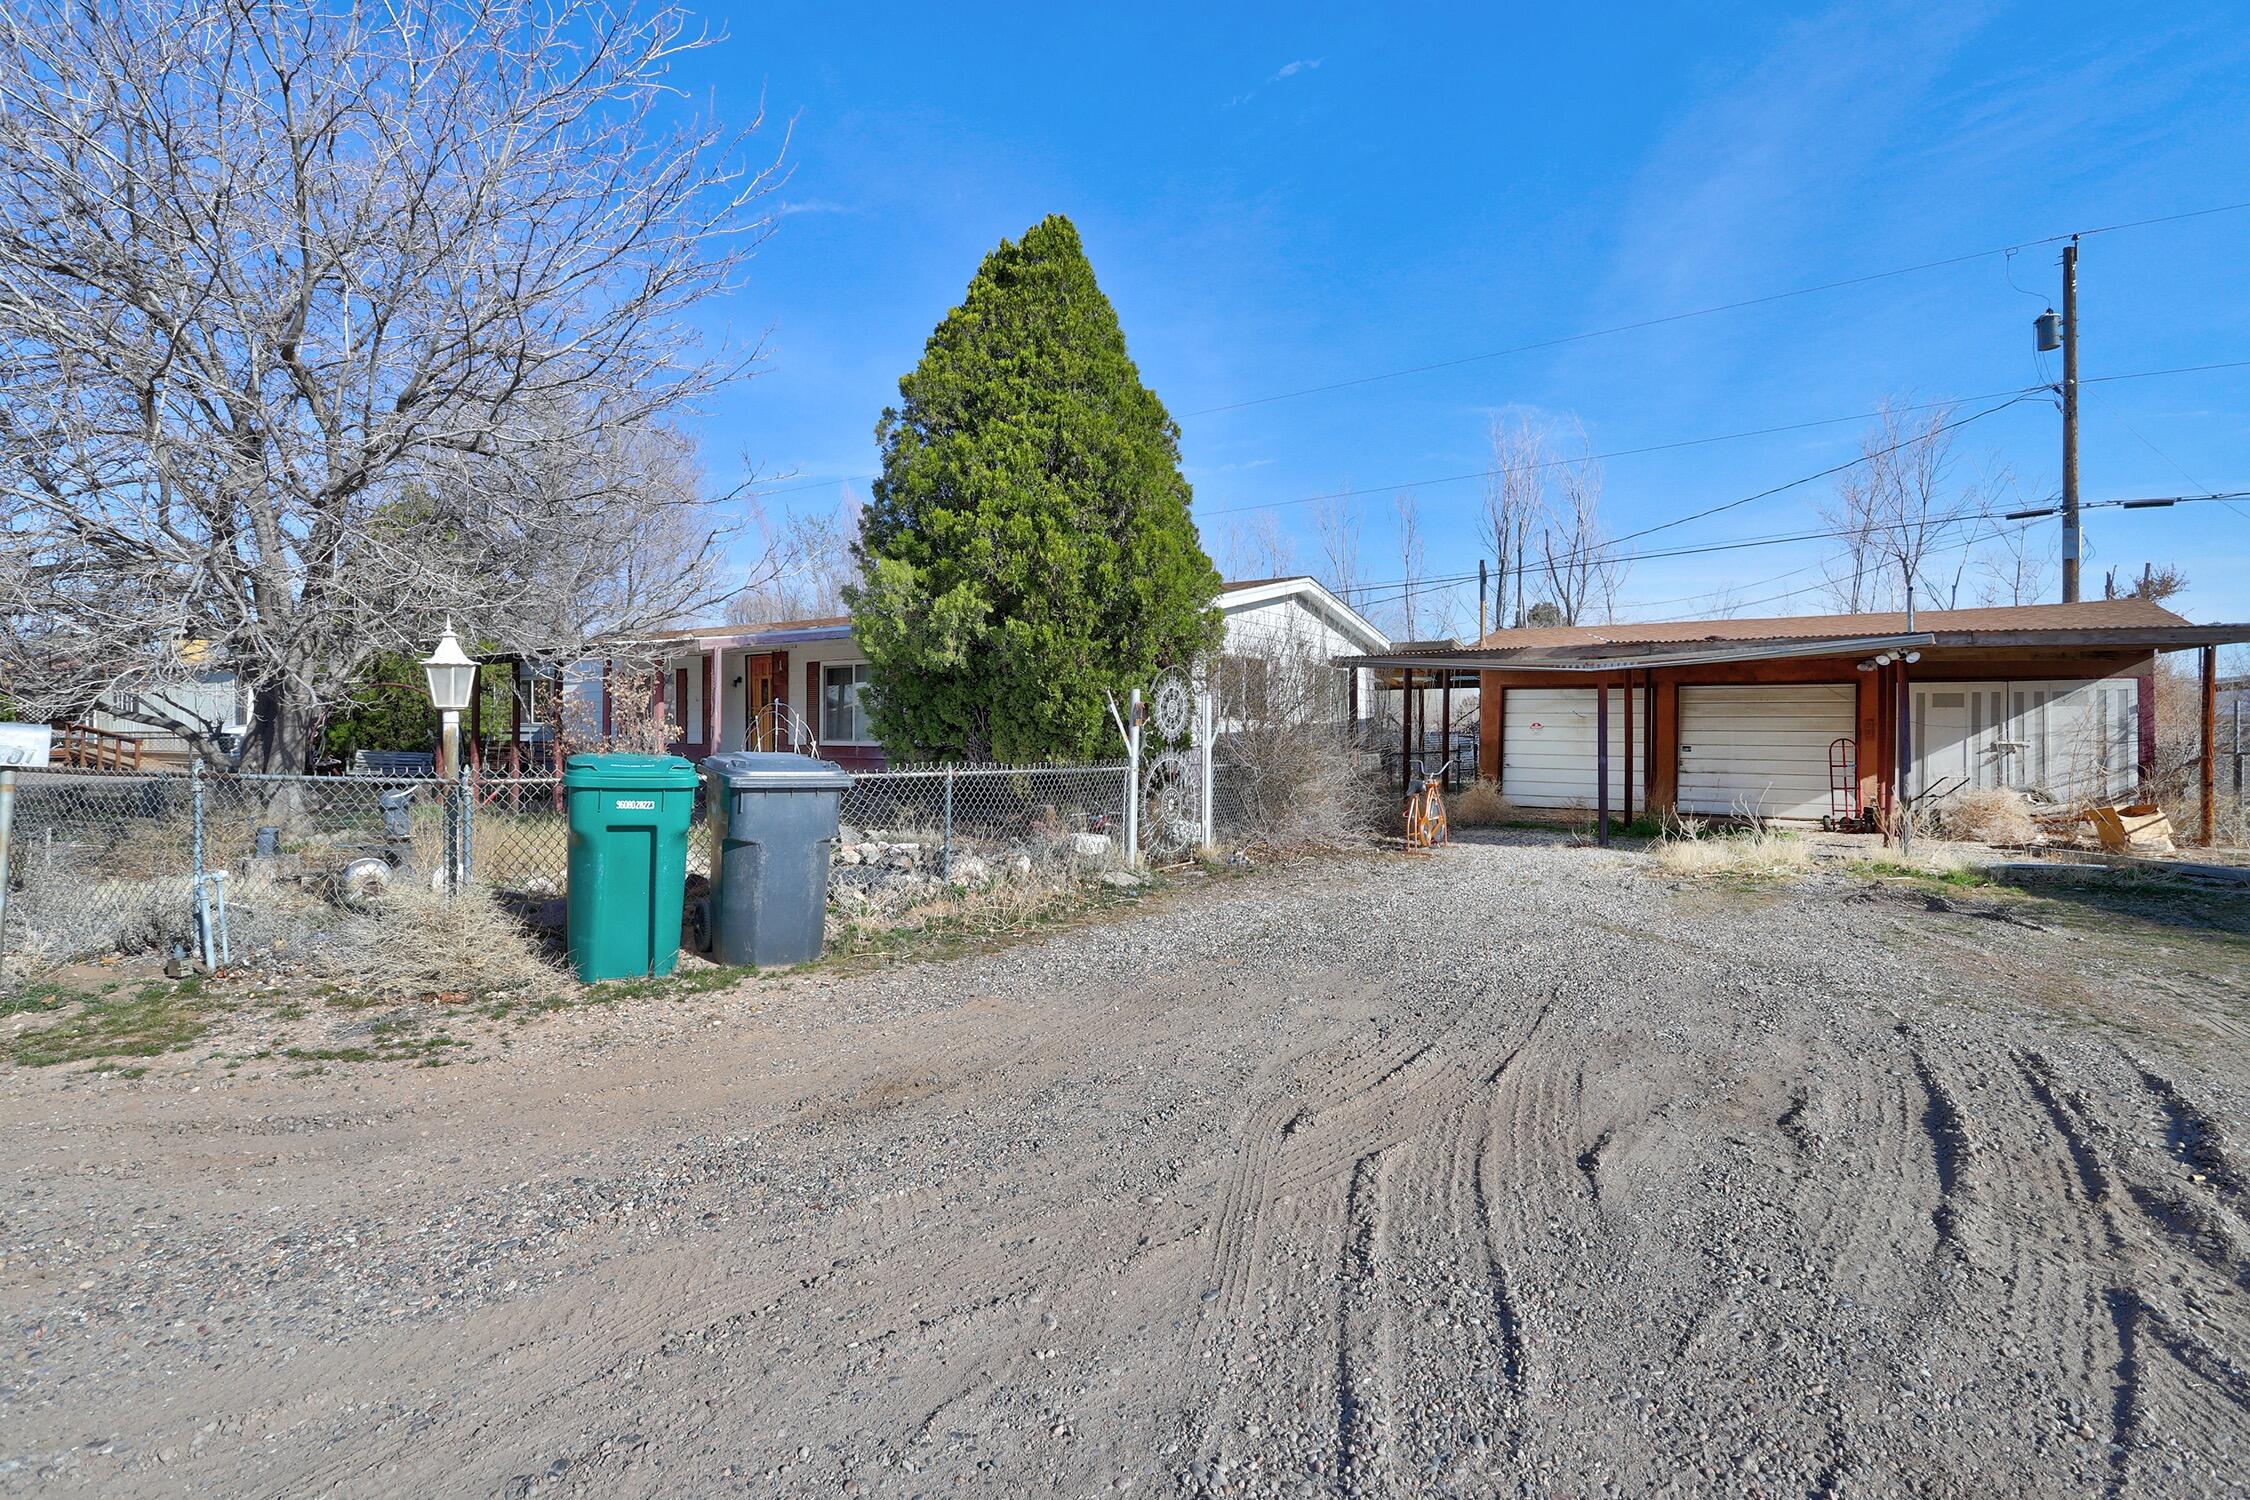 Welcome to Los Ranchos! This 3 bedroom, 2 bathroom home has tons of potential! This 0.25 acre lot has fantastic location on dead-end street, near Bosque trails and fabulous restaurants/amenities. 724sqft bonus room not included in sqft! 3 car detached garage with 3 car carport.